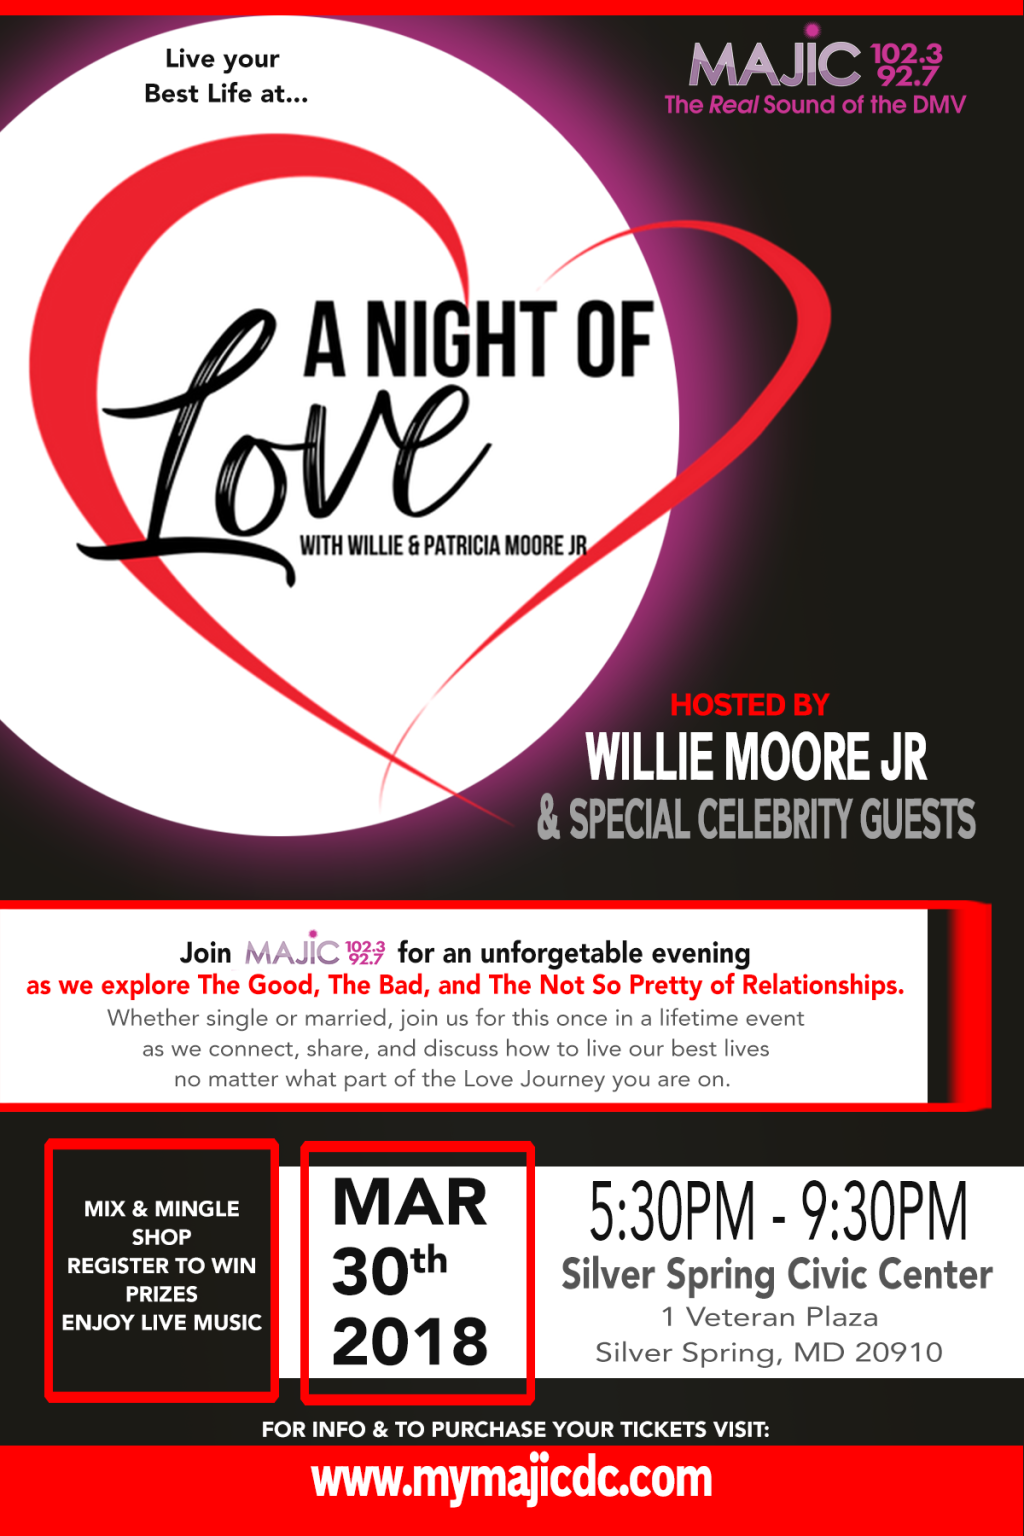 "A Night Of Love" With Willie & Patricia Moore Jr